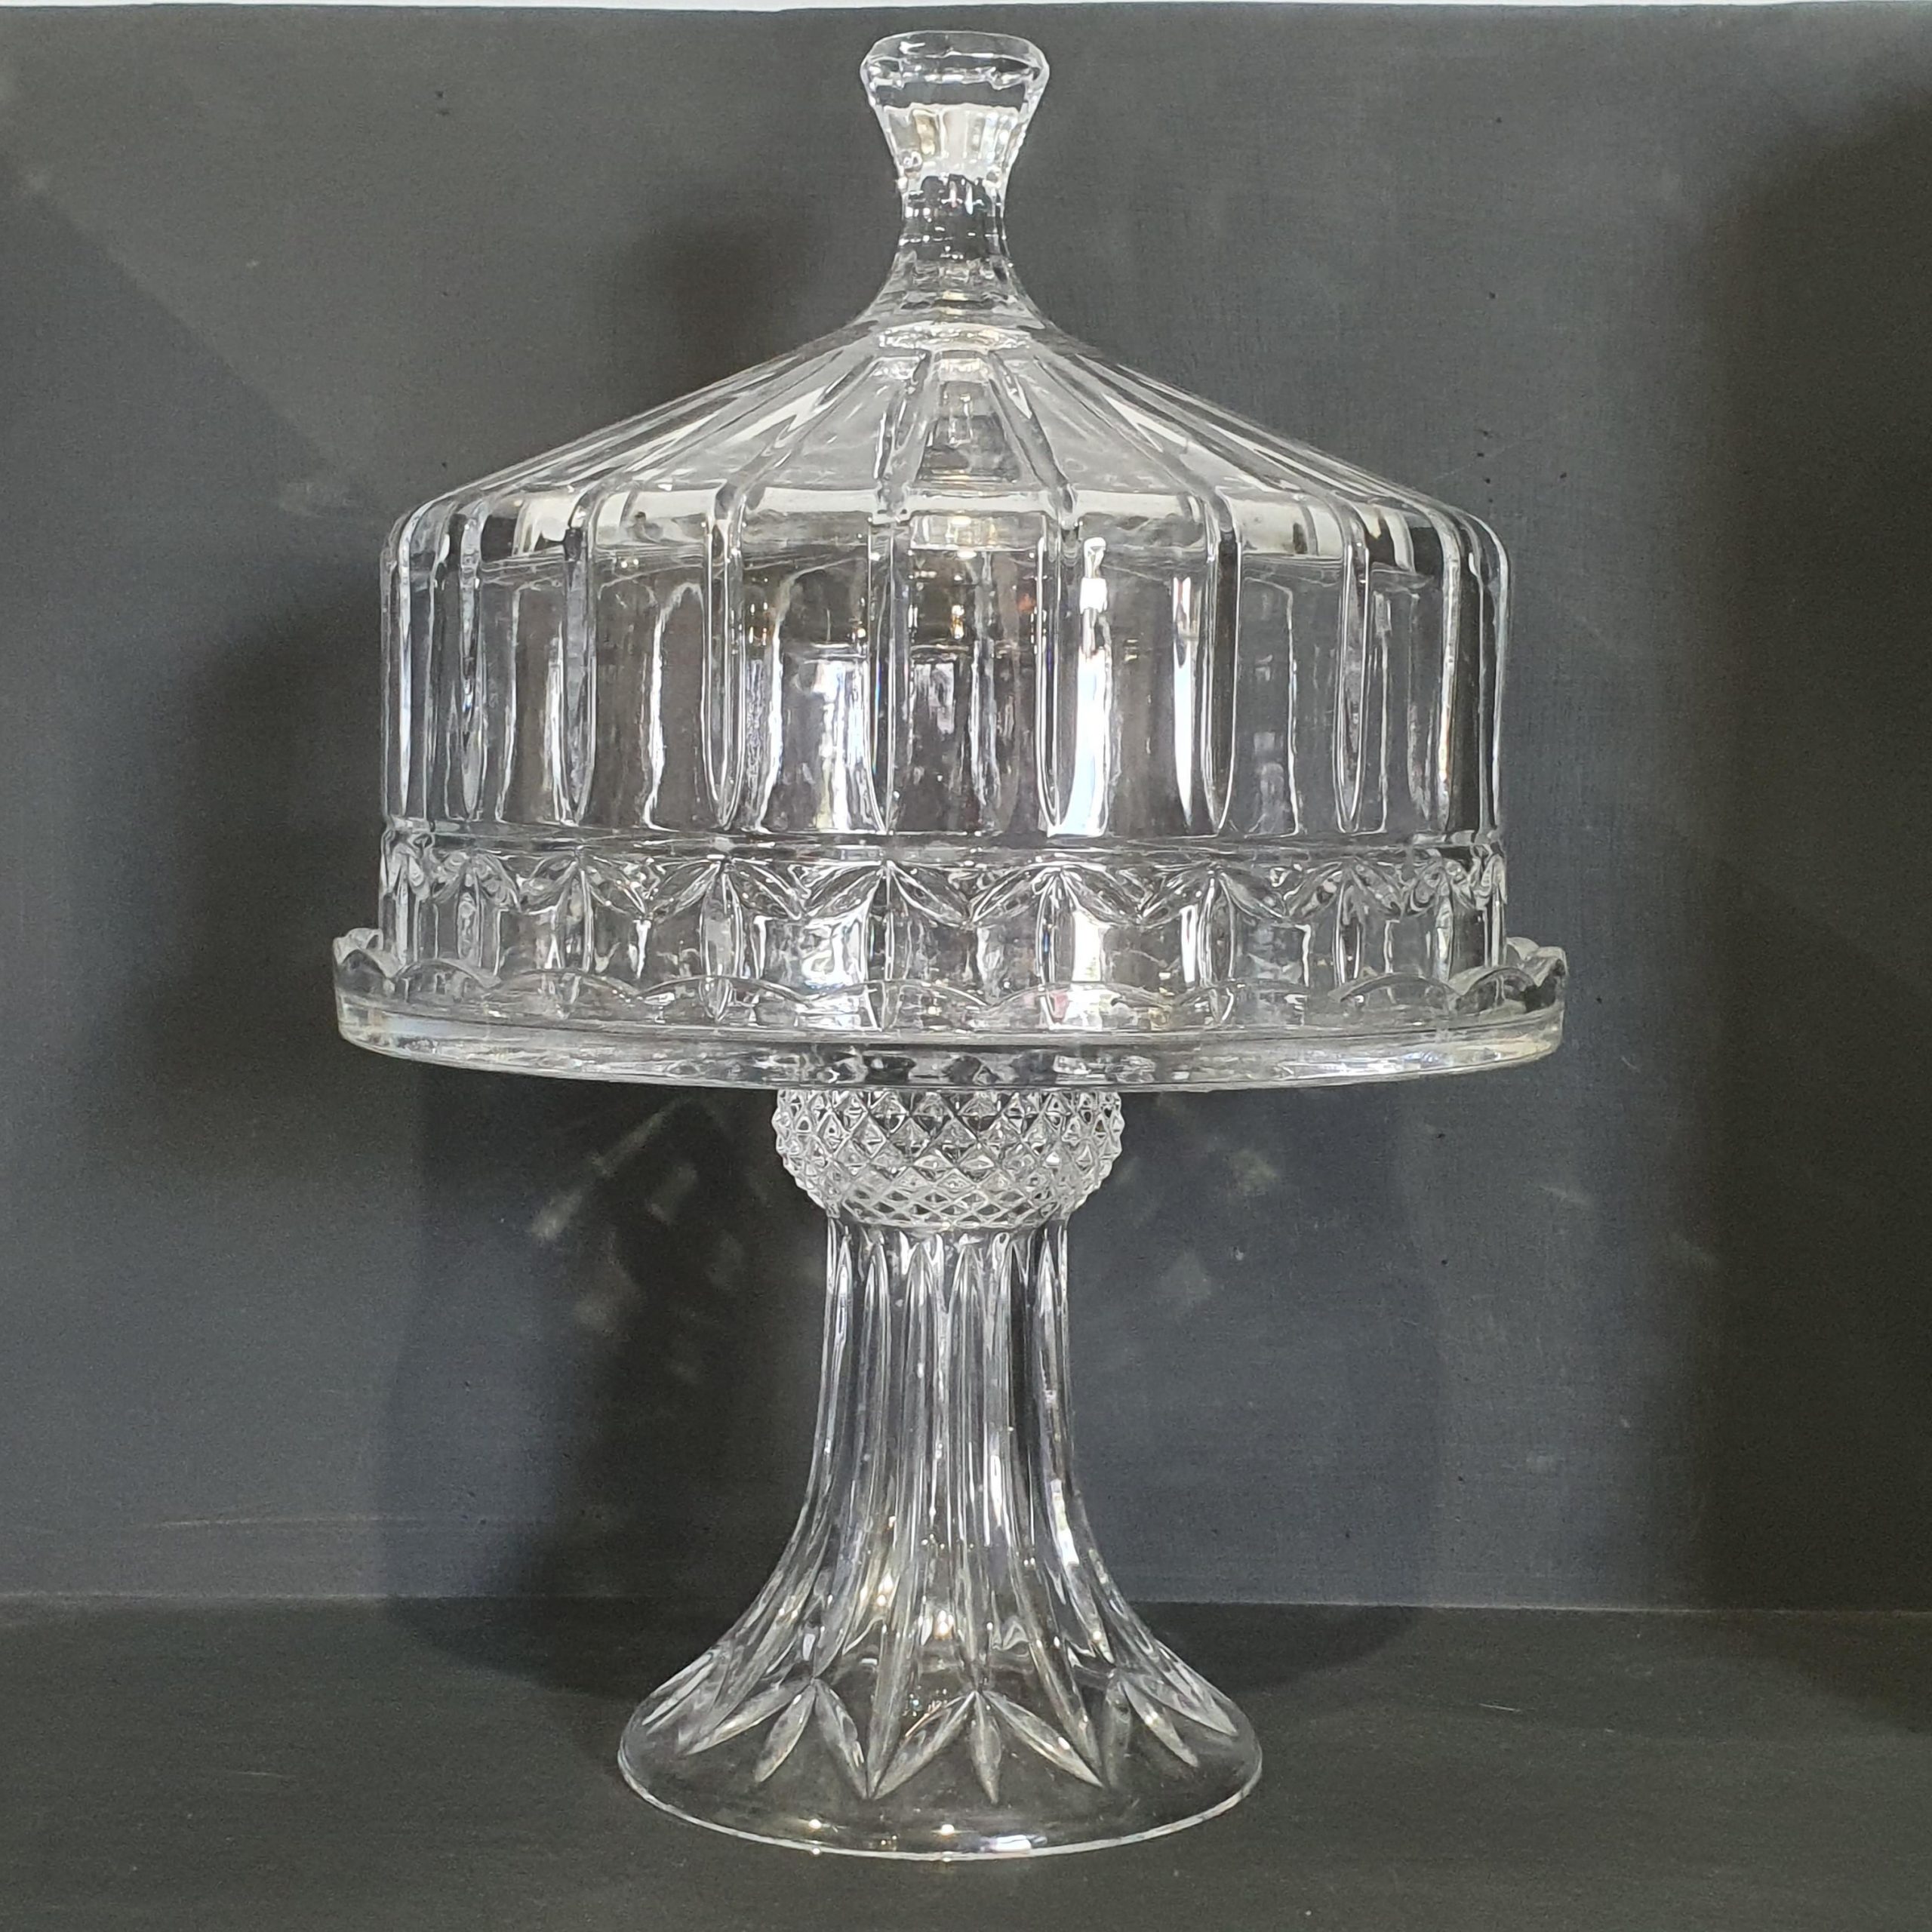 Glass Cake Stand for sale in Co. Waterford for €15 on DoneDeal